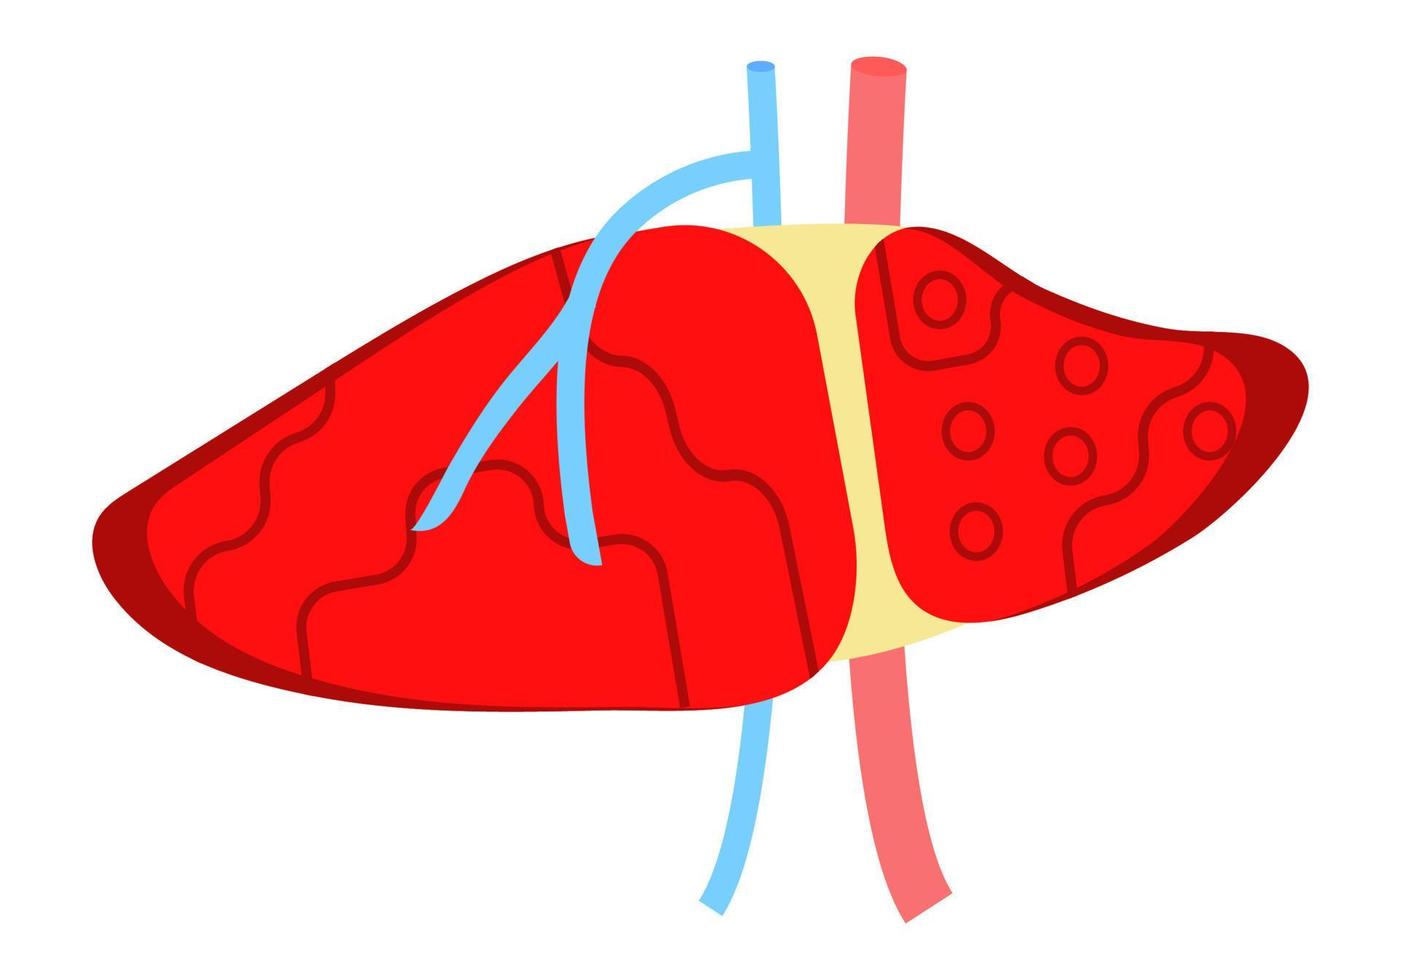 Liver flat design vector for website and mobile website development, apps are presented. Viral hepatitis A, B, C, D is symbol, cirrhosis icon.